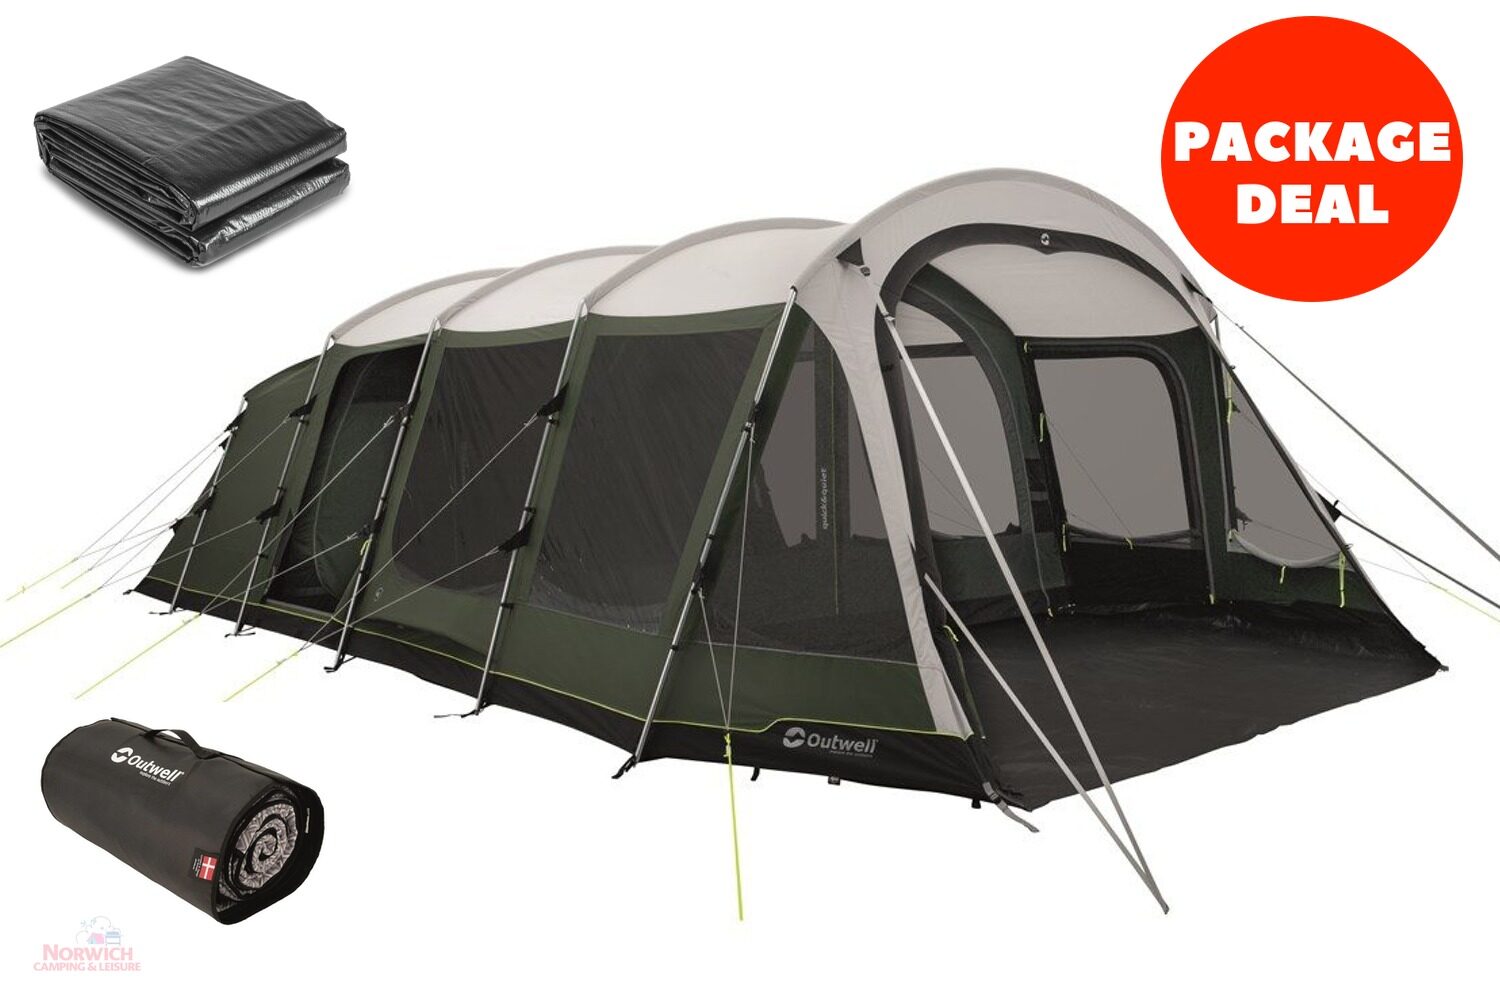 Outwell Yosemite 6Tc Tent Package Deal